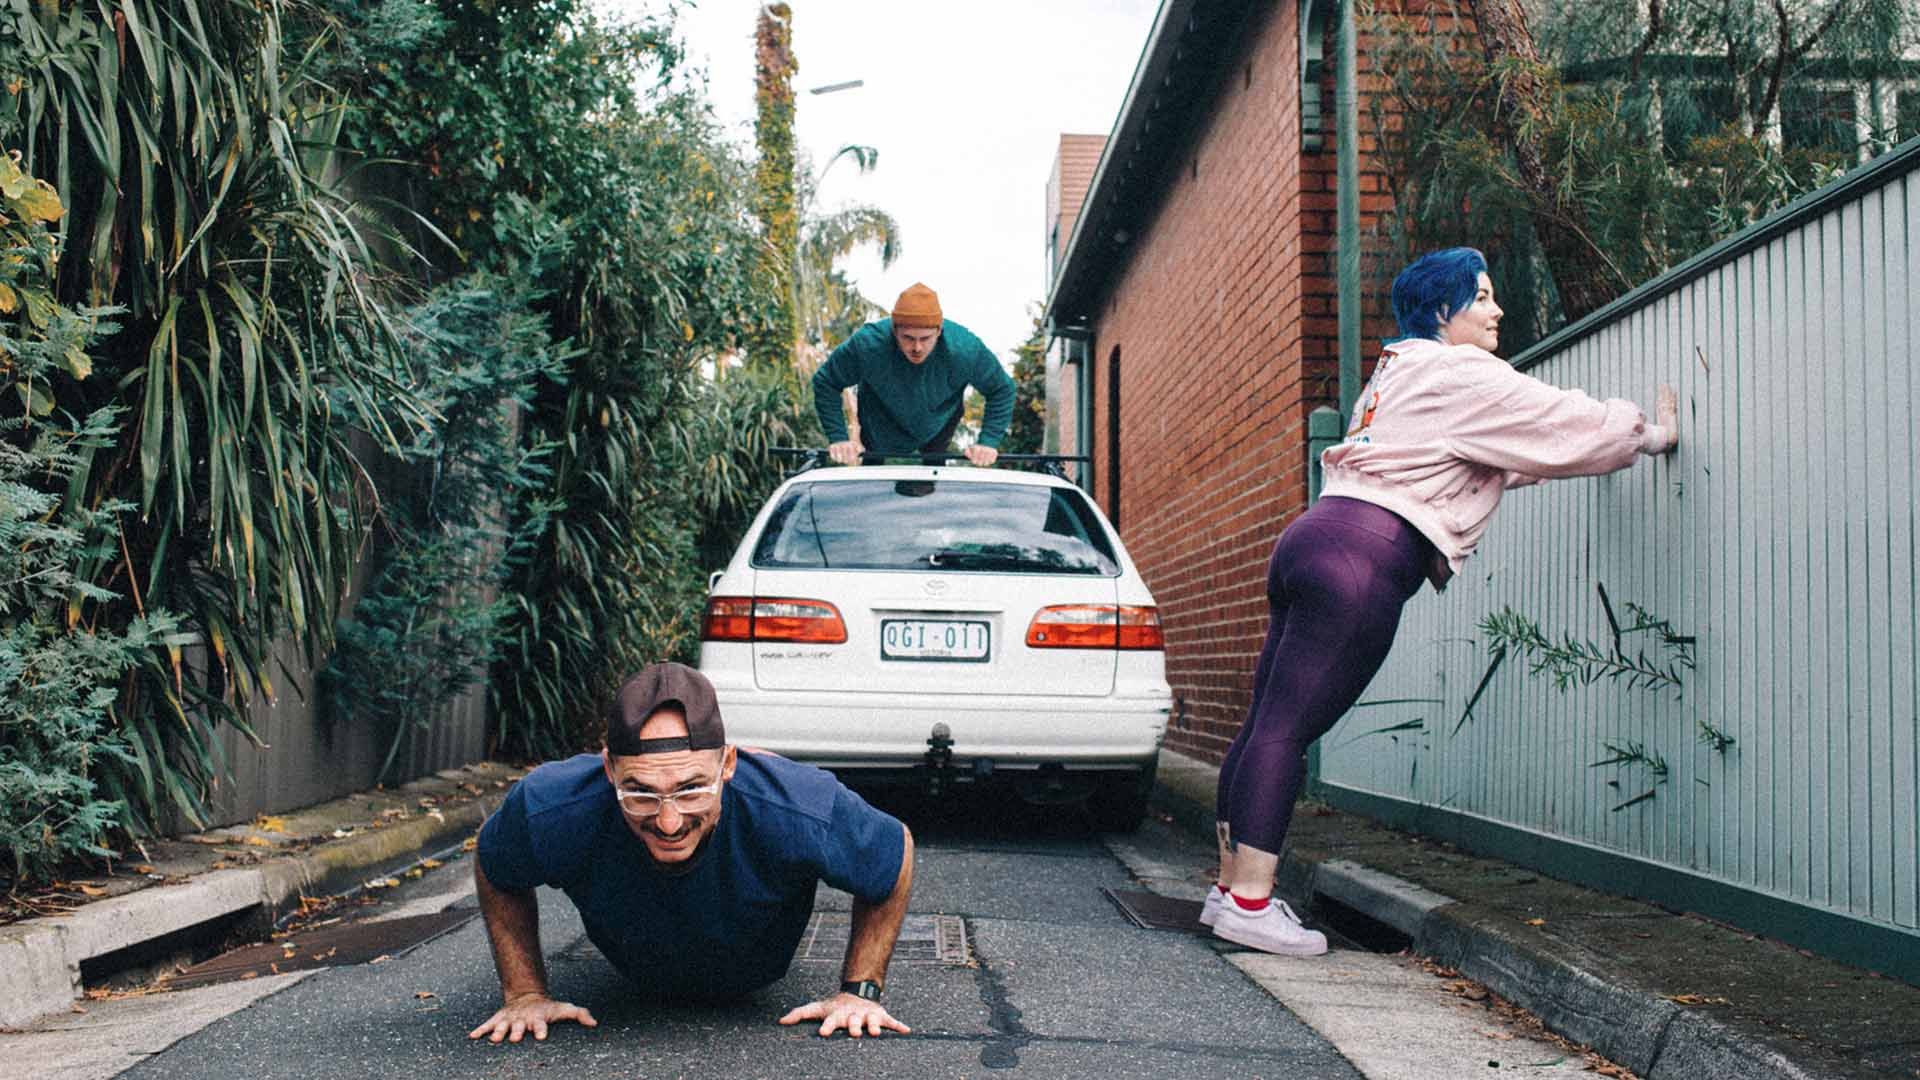 Three people performing push-ups in a suburban driveway.